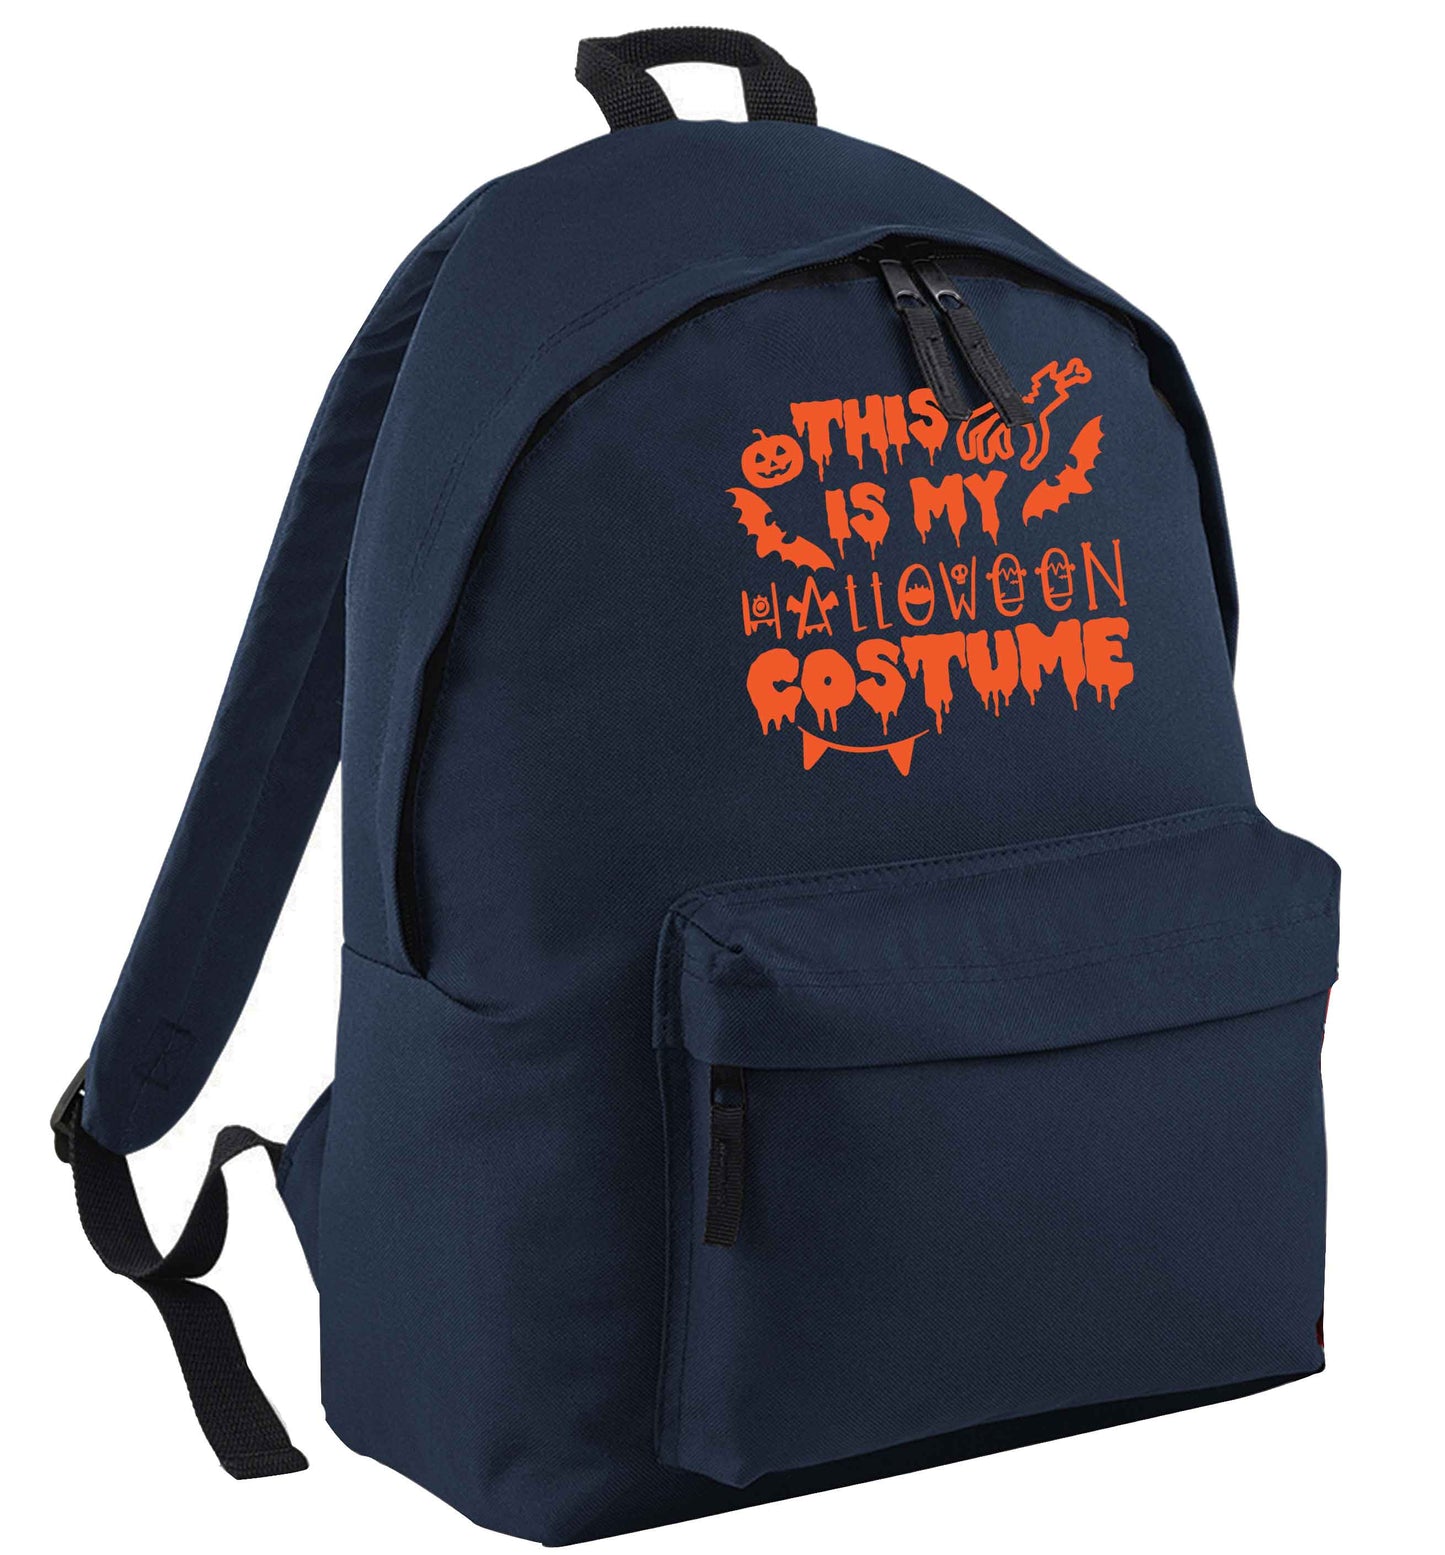 This is my halloween costume | Children's backpack